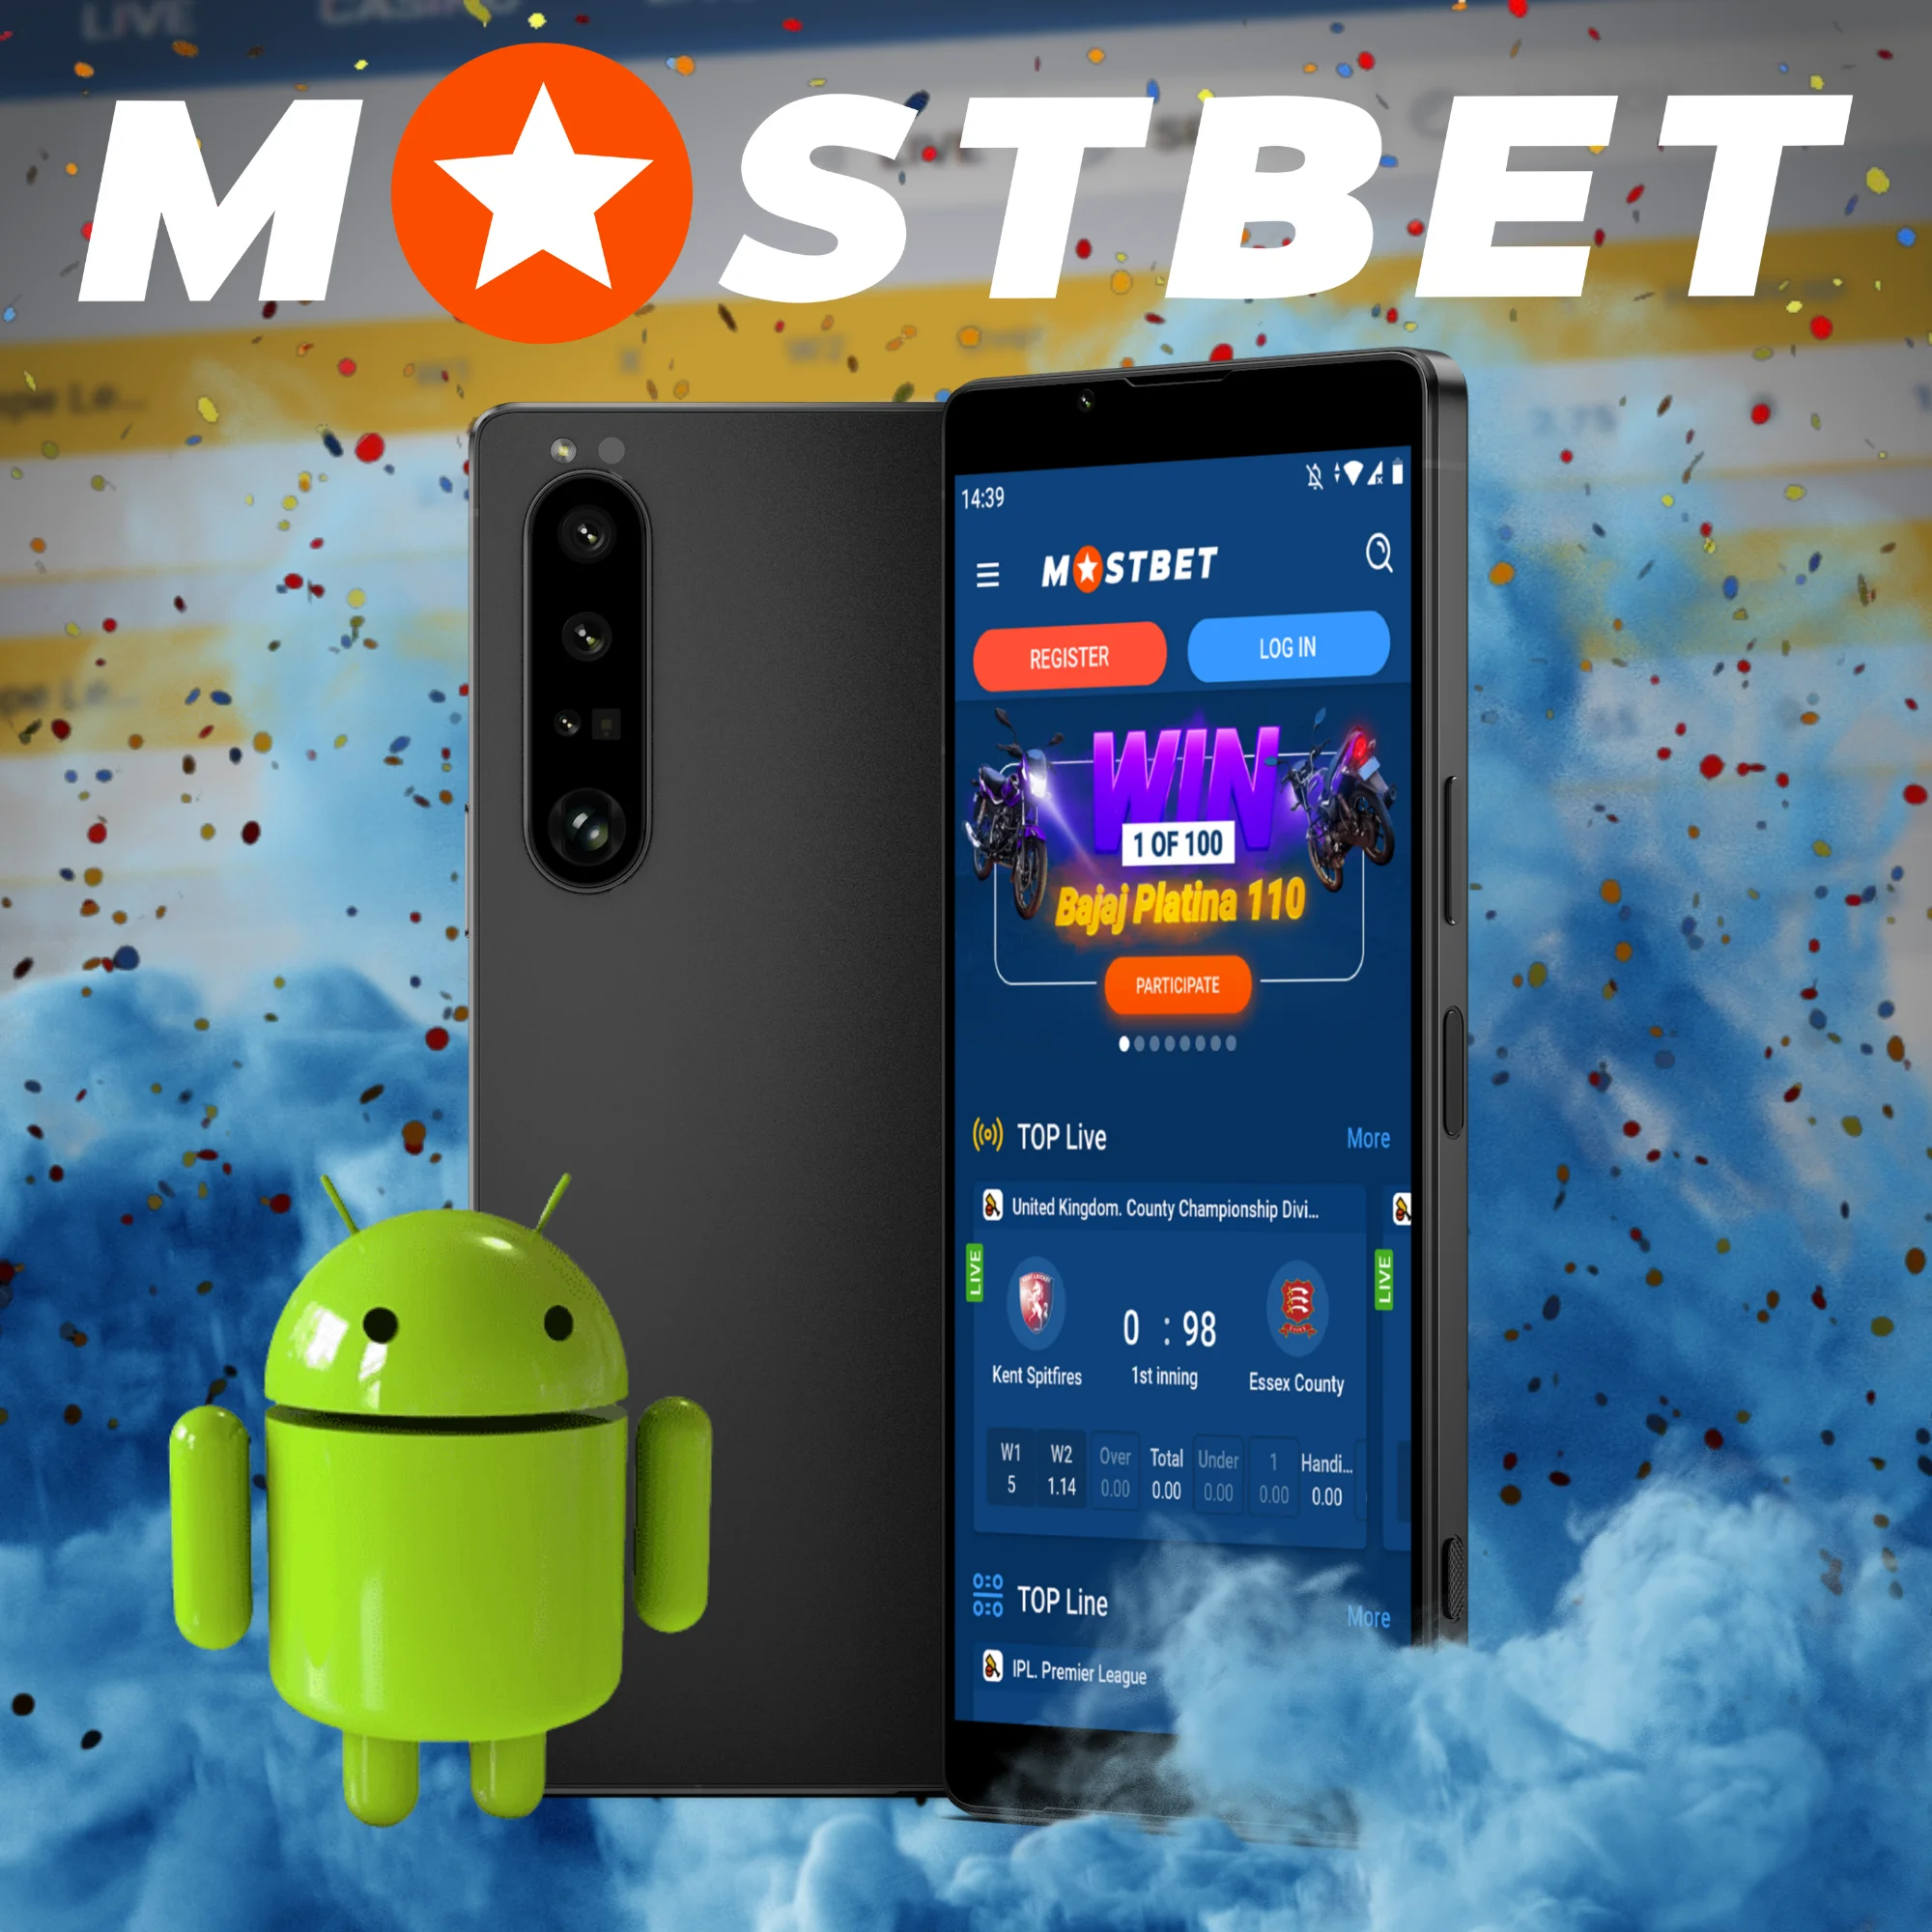 Mostbet Mobile App on Android